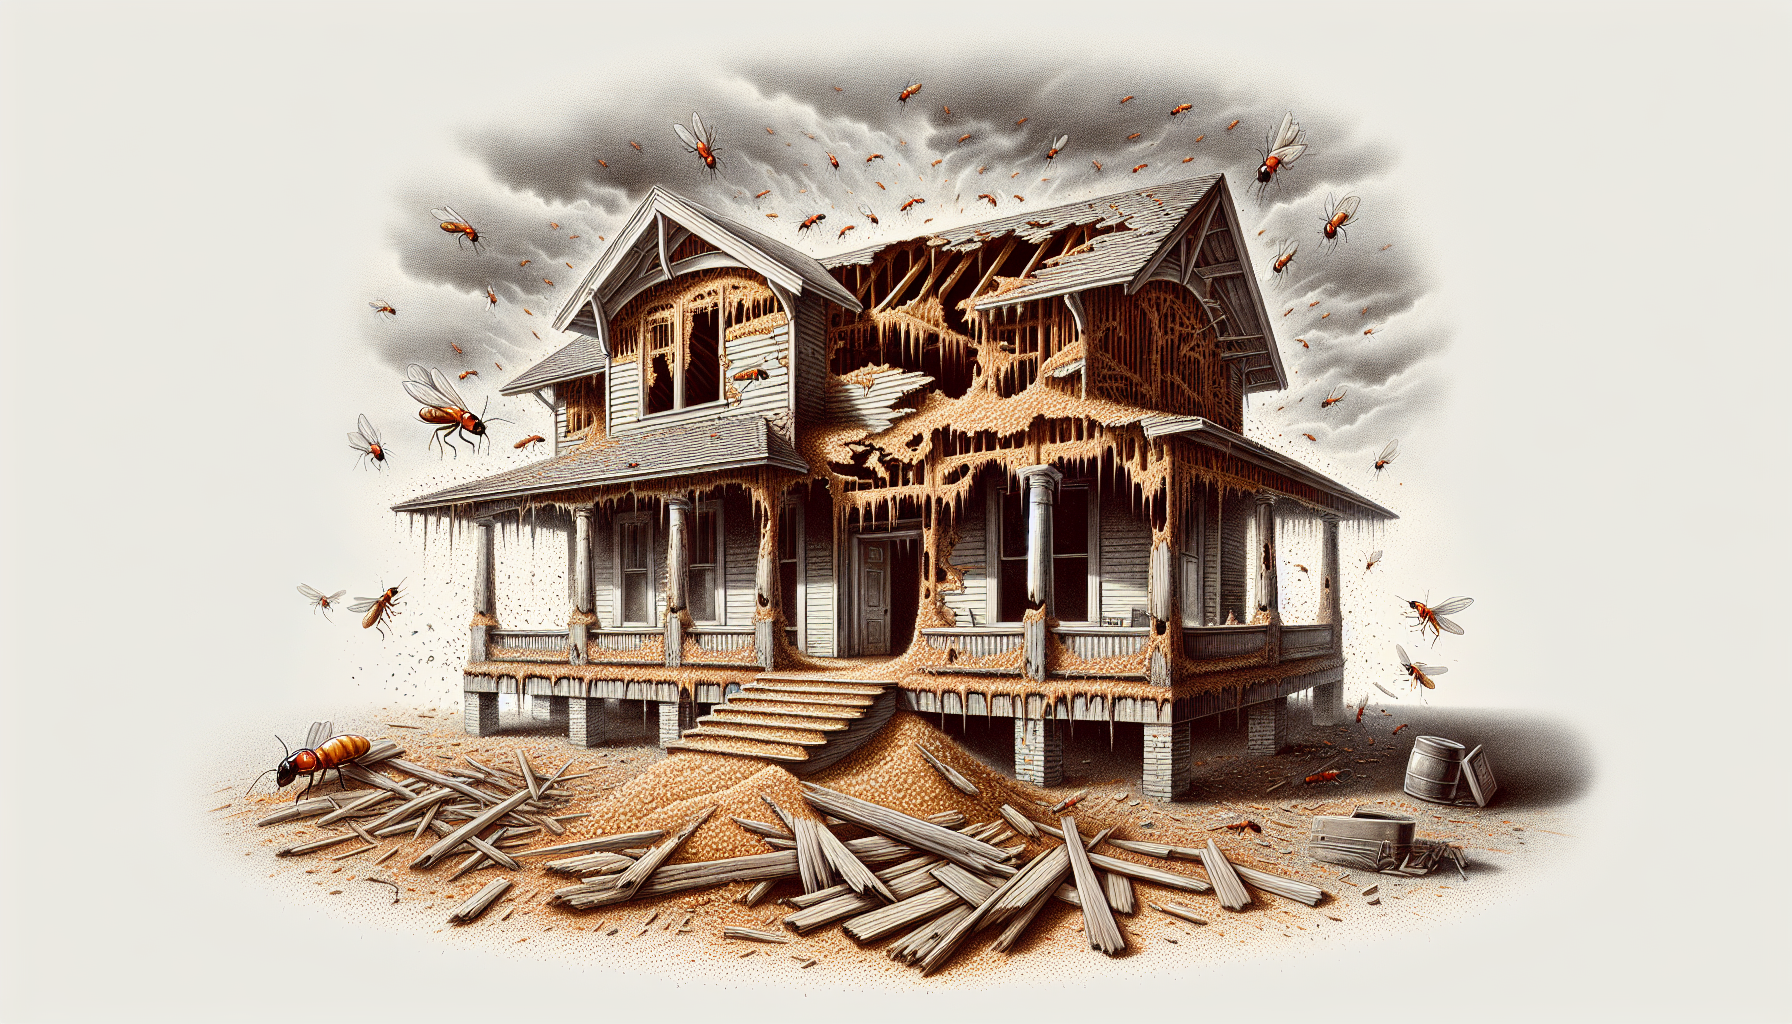 Illustration of termites causing damage to wooden structures